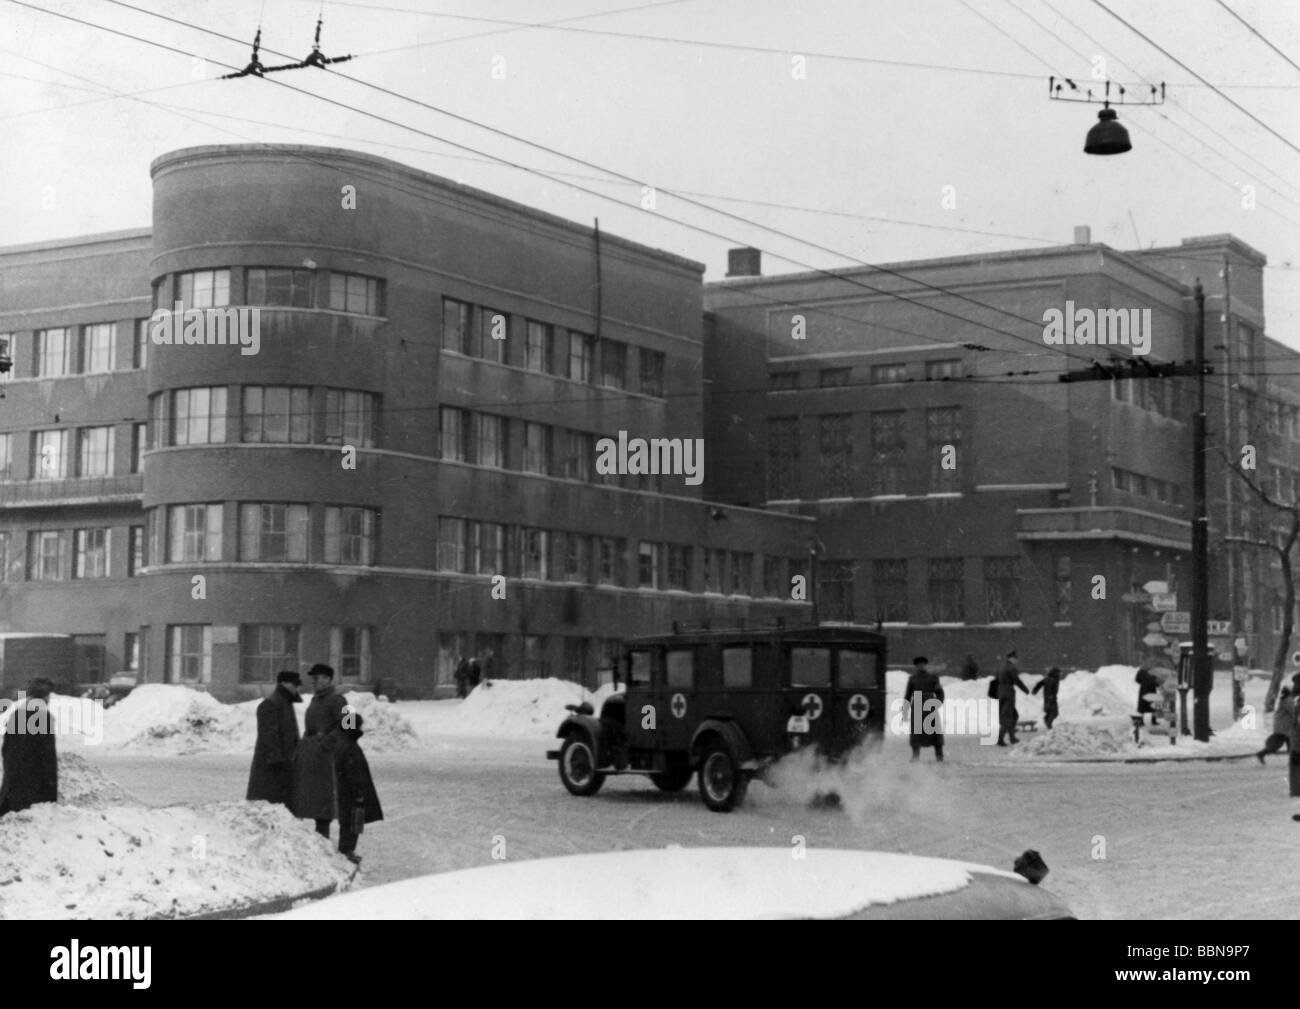 events, Second World War / WWII, Russia 1942 / 1943, German occupation, vehicle of the Wehrmacht medical service in Stalino, Donets Basin, winter 1942 / 1943, Soviet Union, USSR, 20th century, historic, historical, snow, Third Reich, lorries, lorry, medicine, people, 1940s, Stock Photo